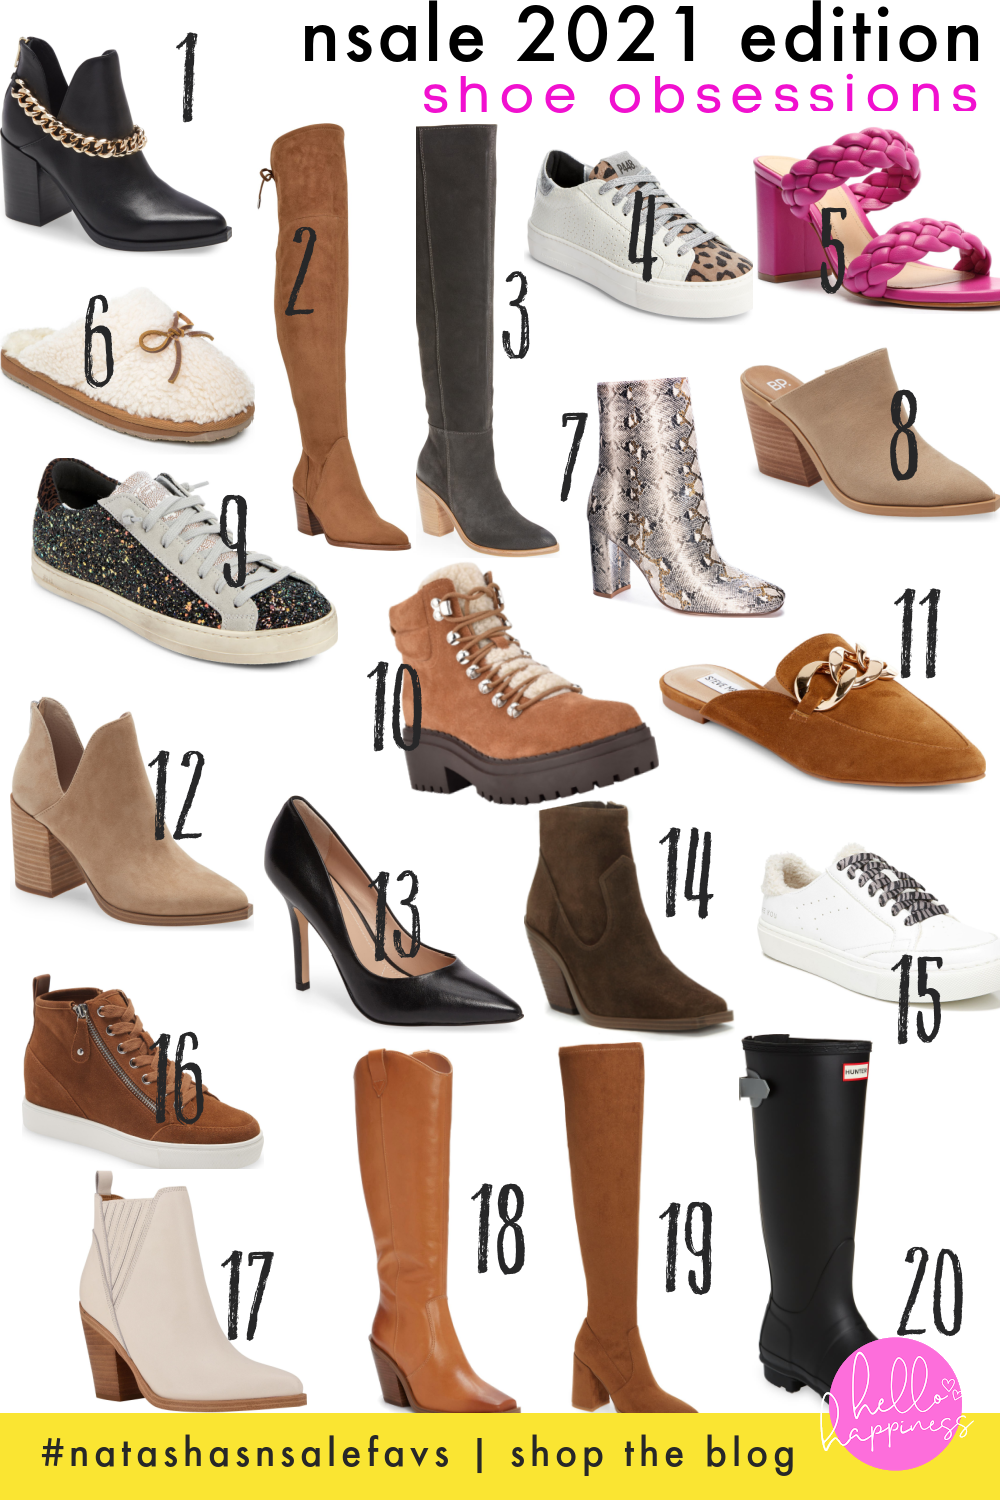 Nordstrom Anniversary Sale by popular Nashville fashion blog, Hello Happiness: collage image of pink braid strap block heel sandals, glitter sneakers, tan ankle boots, black ankle boots, black pump, brown western ankle boots, white sneakers, white and leopard print sneakers, black hunter rain boots, wubby fleece slippers, snake skin ankle bots, knee high western boots, high top sneakers, and brown suede over the knee boots. 